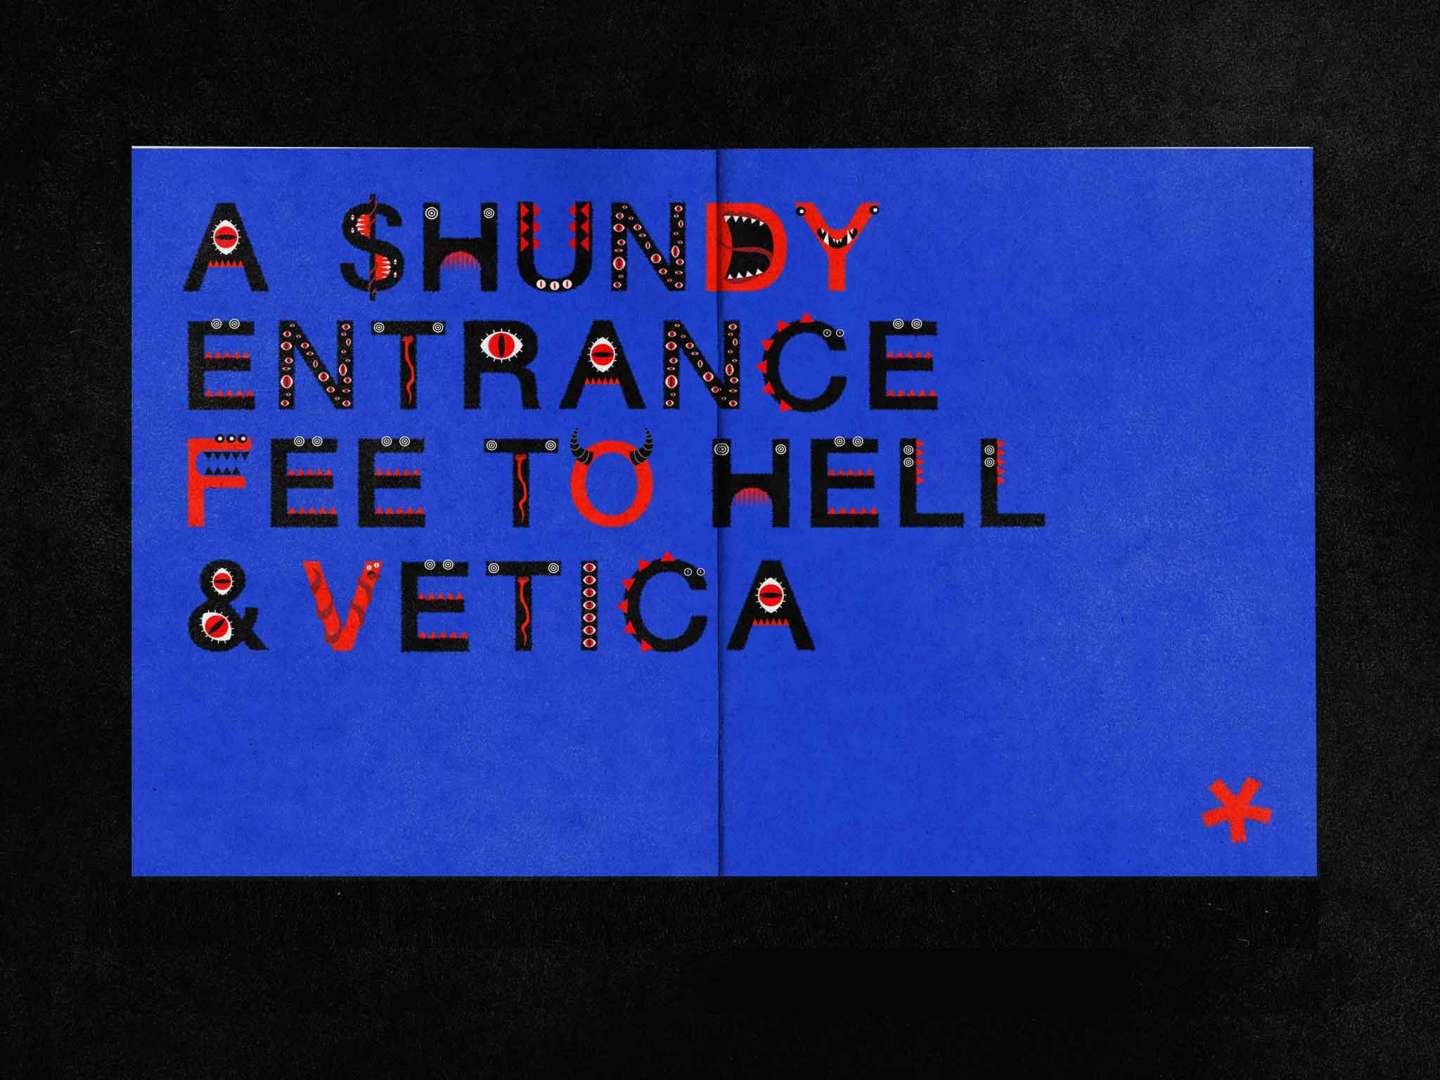 Hell & Vetica